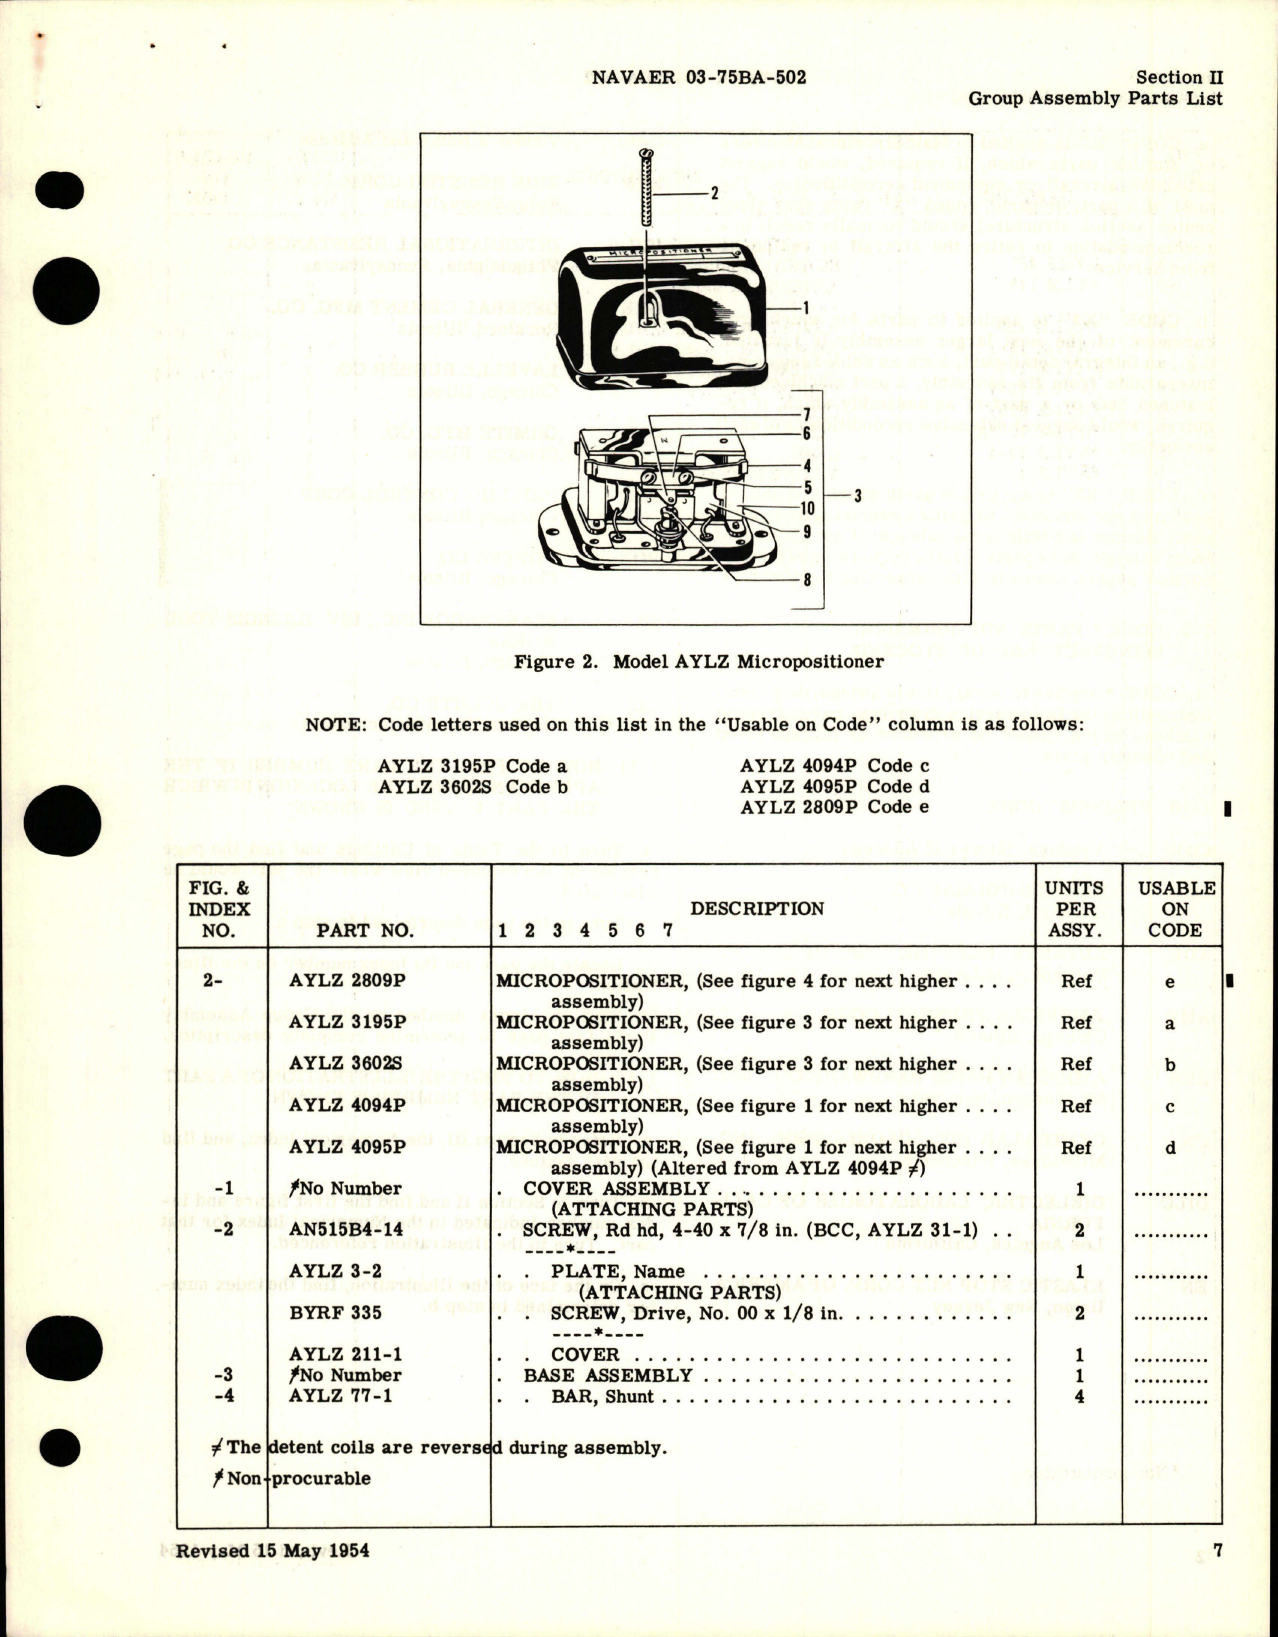 Sample page 7 from AirCorps Library document: Illustrated Parts Breakdown for Aircraft Temperature Control System Control Box